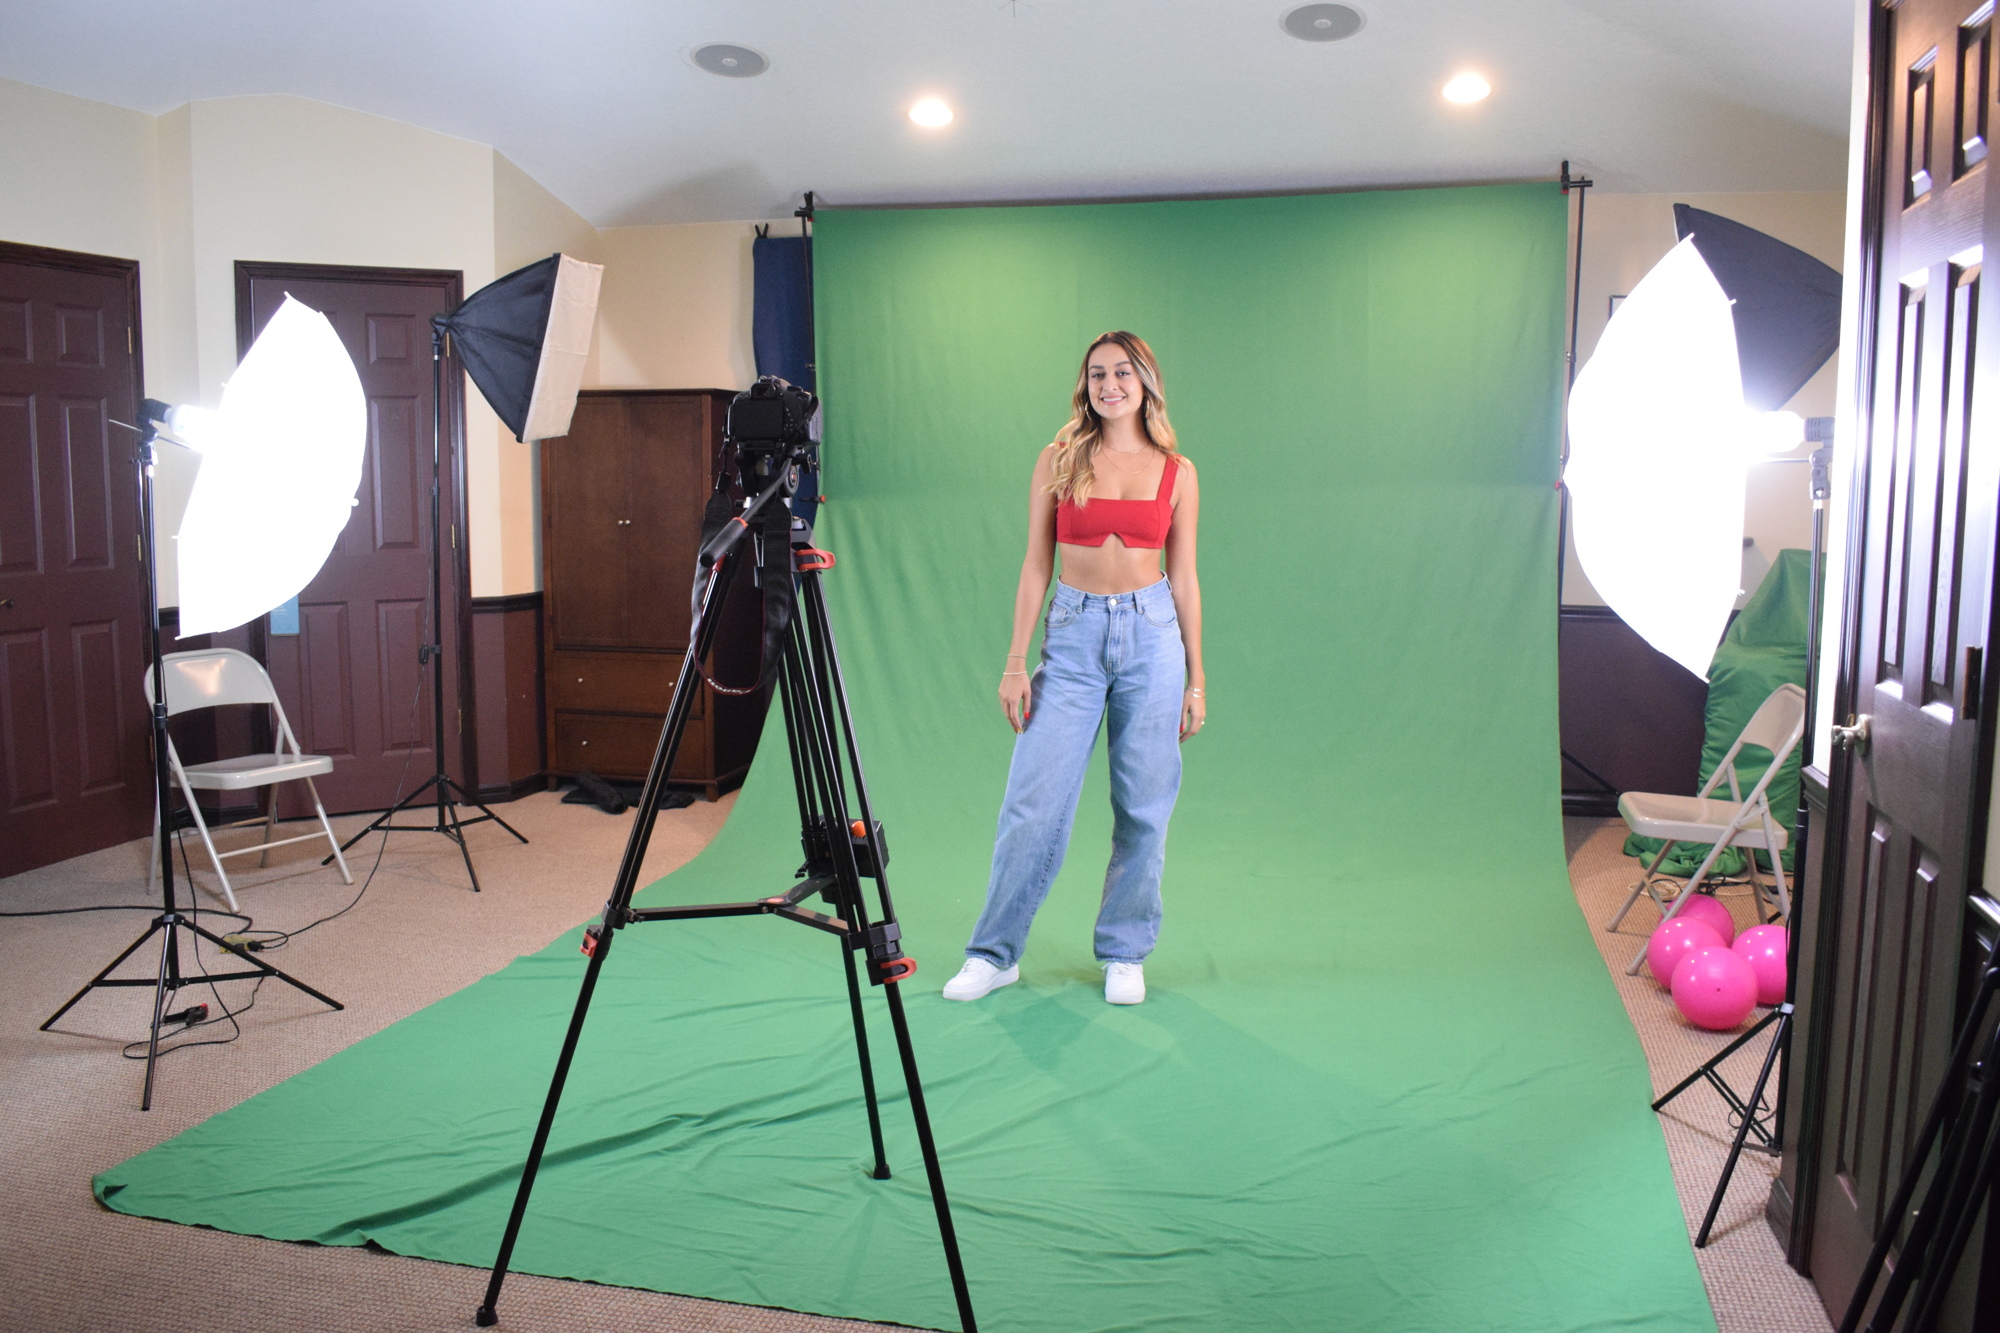 iLana Armida uses the green screen and other equipment in her home to create a music video for her song 